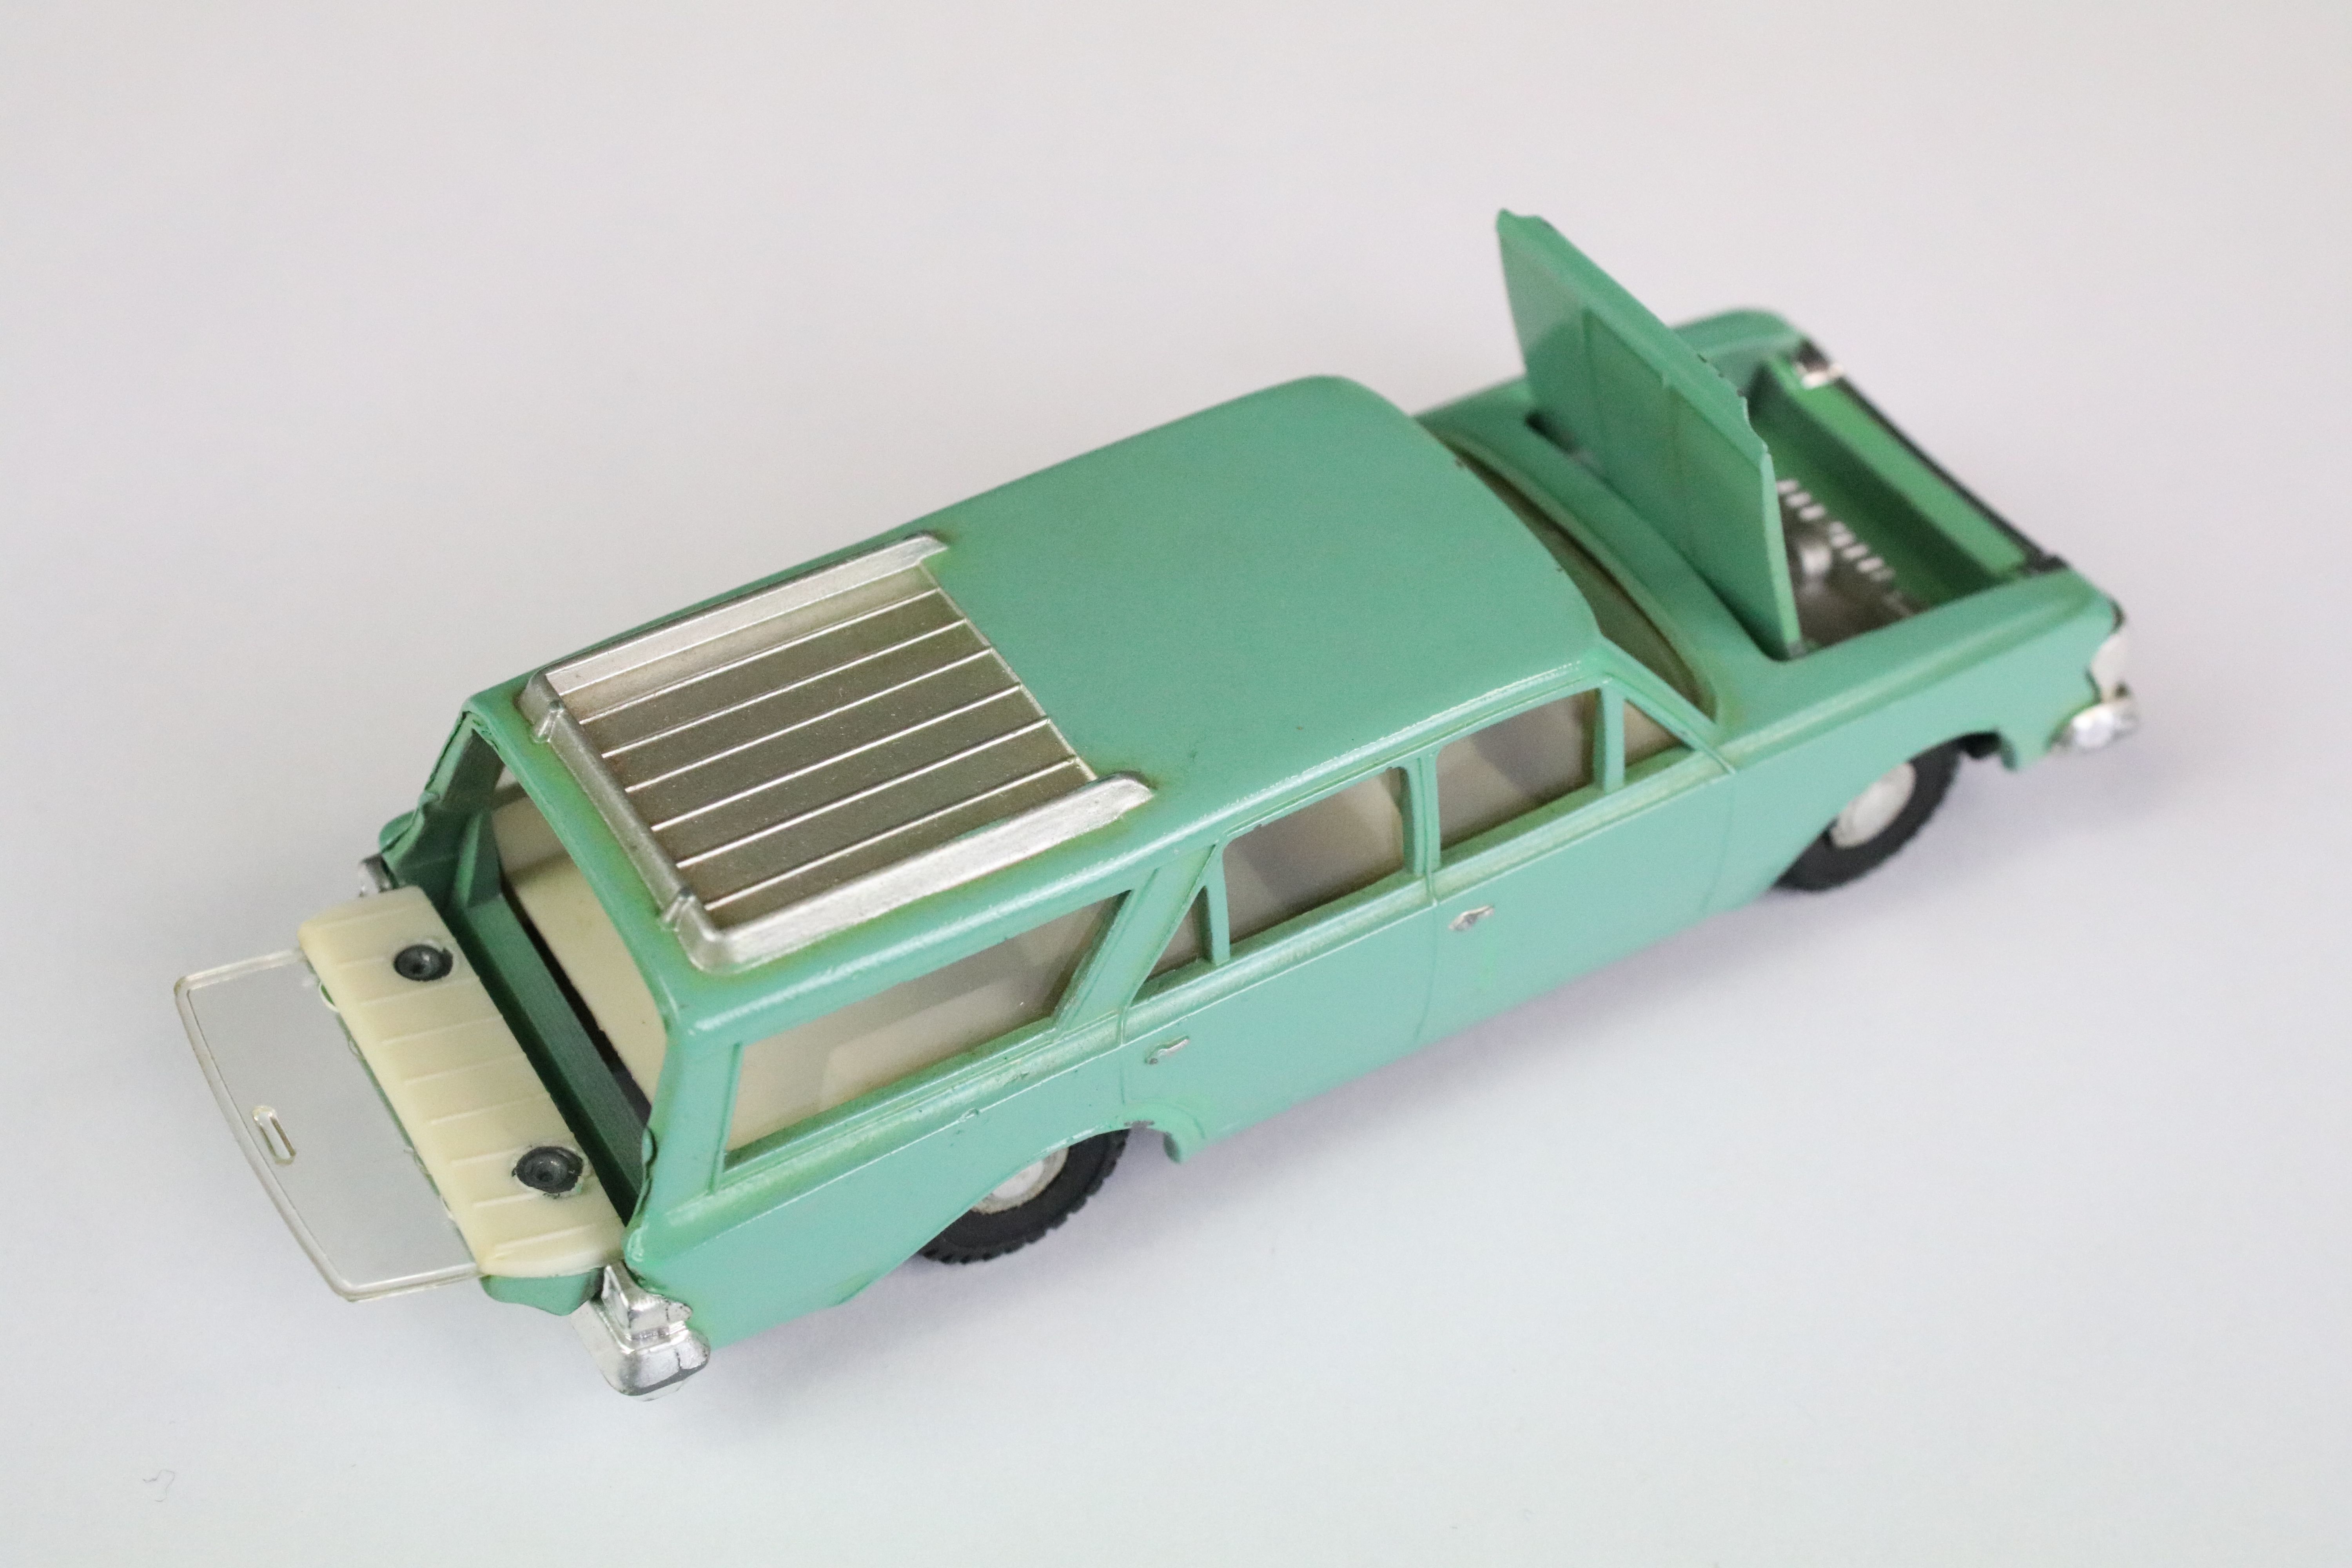 Boxed Hong Kong Dinky 57/006 Rambler Classic diecast model in pale green with silver roof and - Image 3 of 5